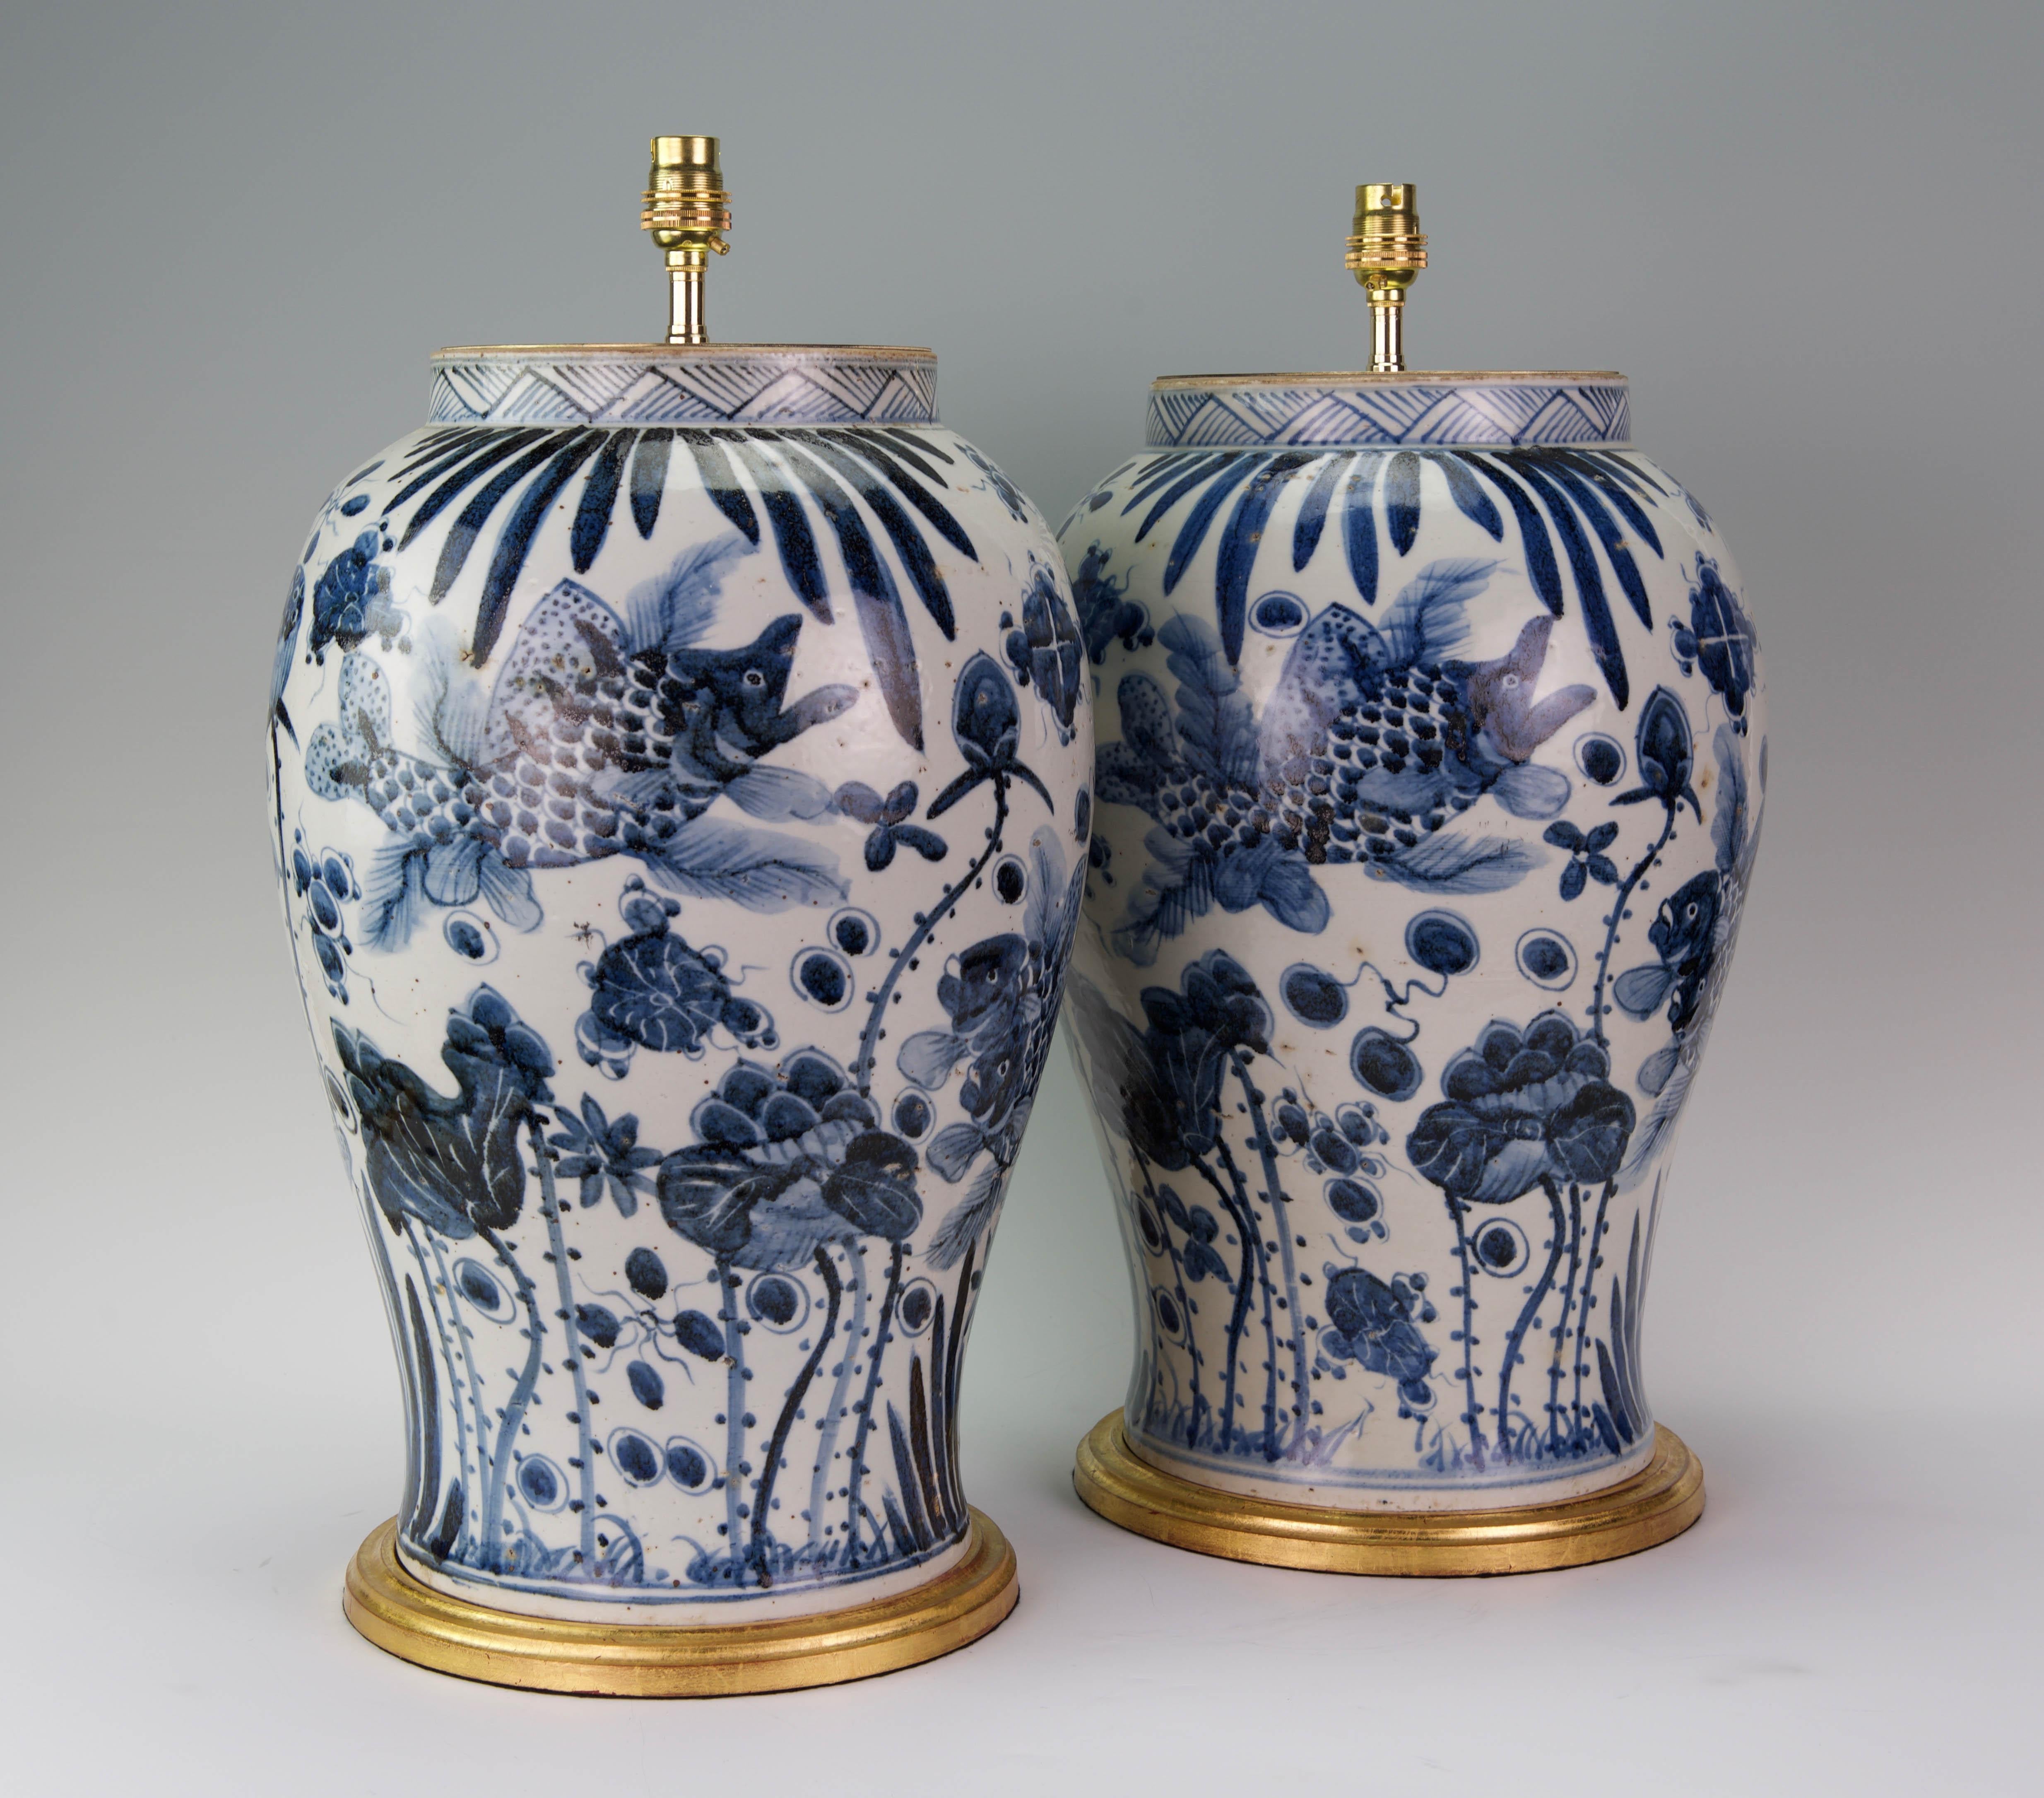 A fine pair of large Chinese blue and white vases decorated throughout in the Kangxi style, with superb fish and aquatic plants in tones of blues on a white ground, now mounted as lamps with hand gilded turned bases.

Height of vases: 18 in (46